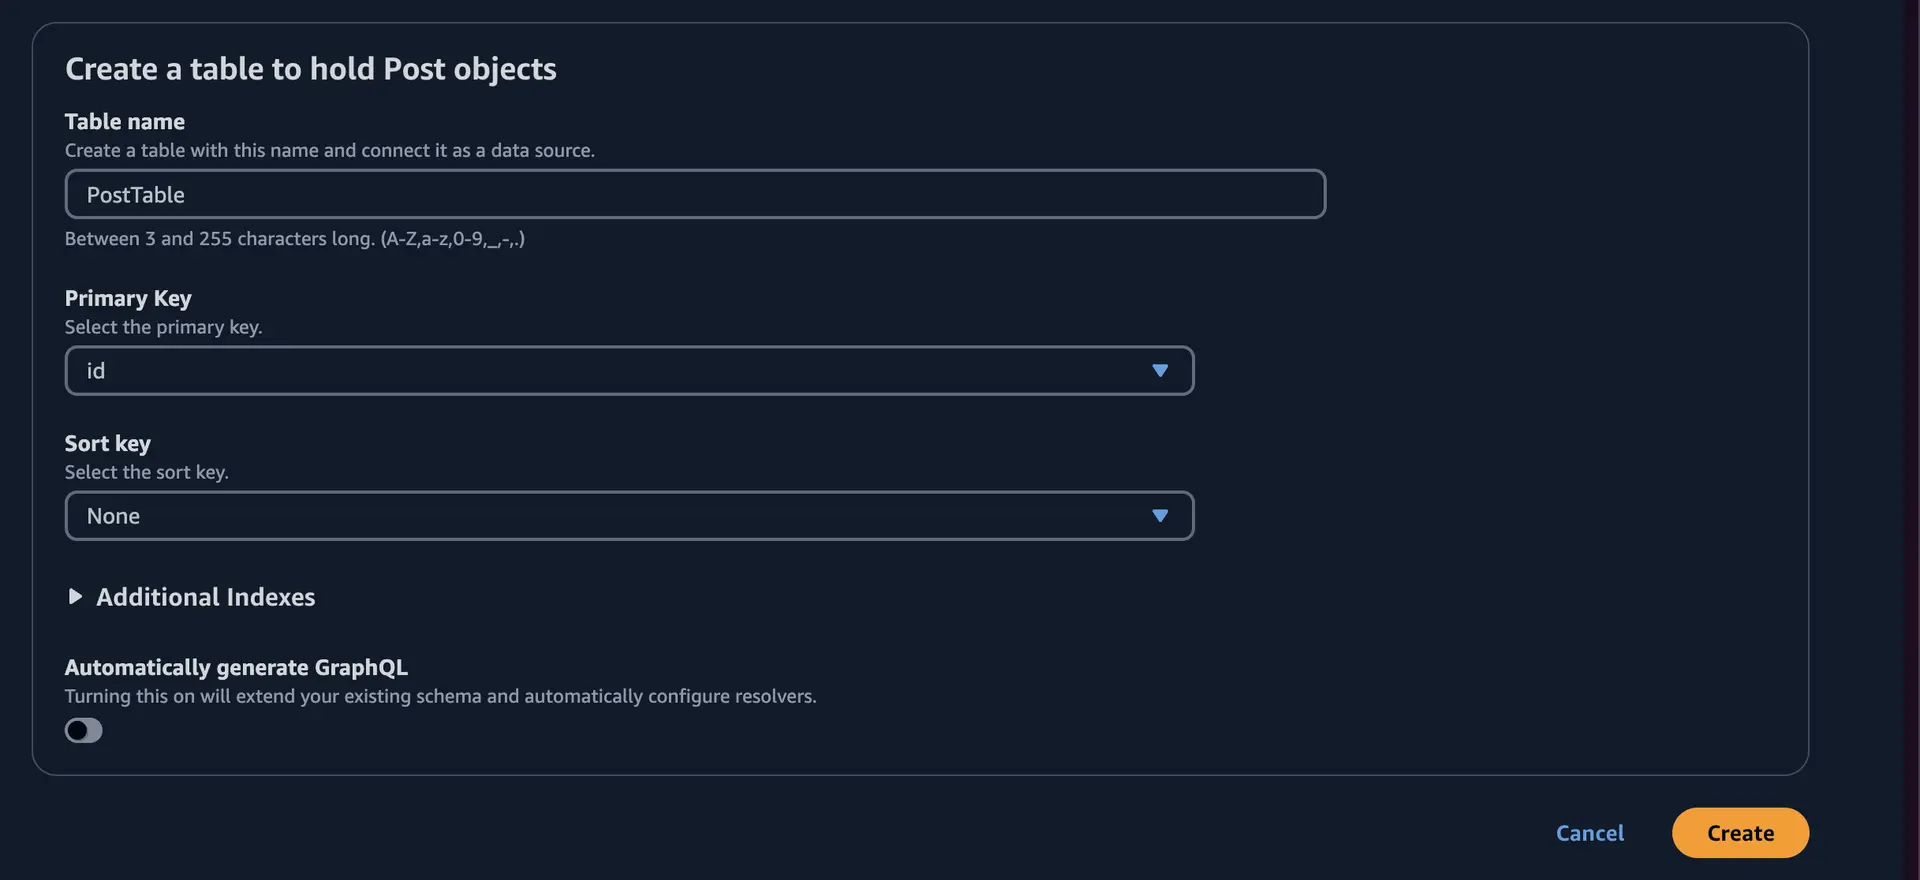 AWS AppSync console, "Create a table to hold Post objects" page. A table structure is shown with columns and values of "Table name": "PostTable", "Primary Key": "id", and "Sort key": "None". Below the table, there is an option to "Automatically generate GraphQL" which is disabled.